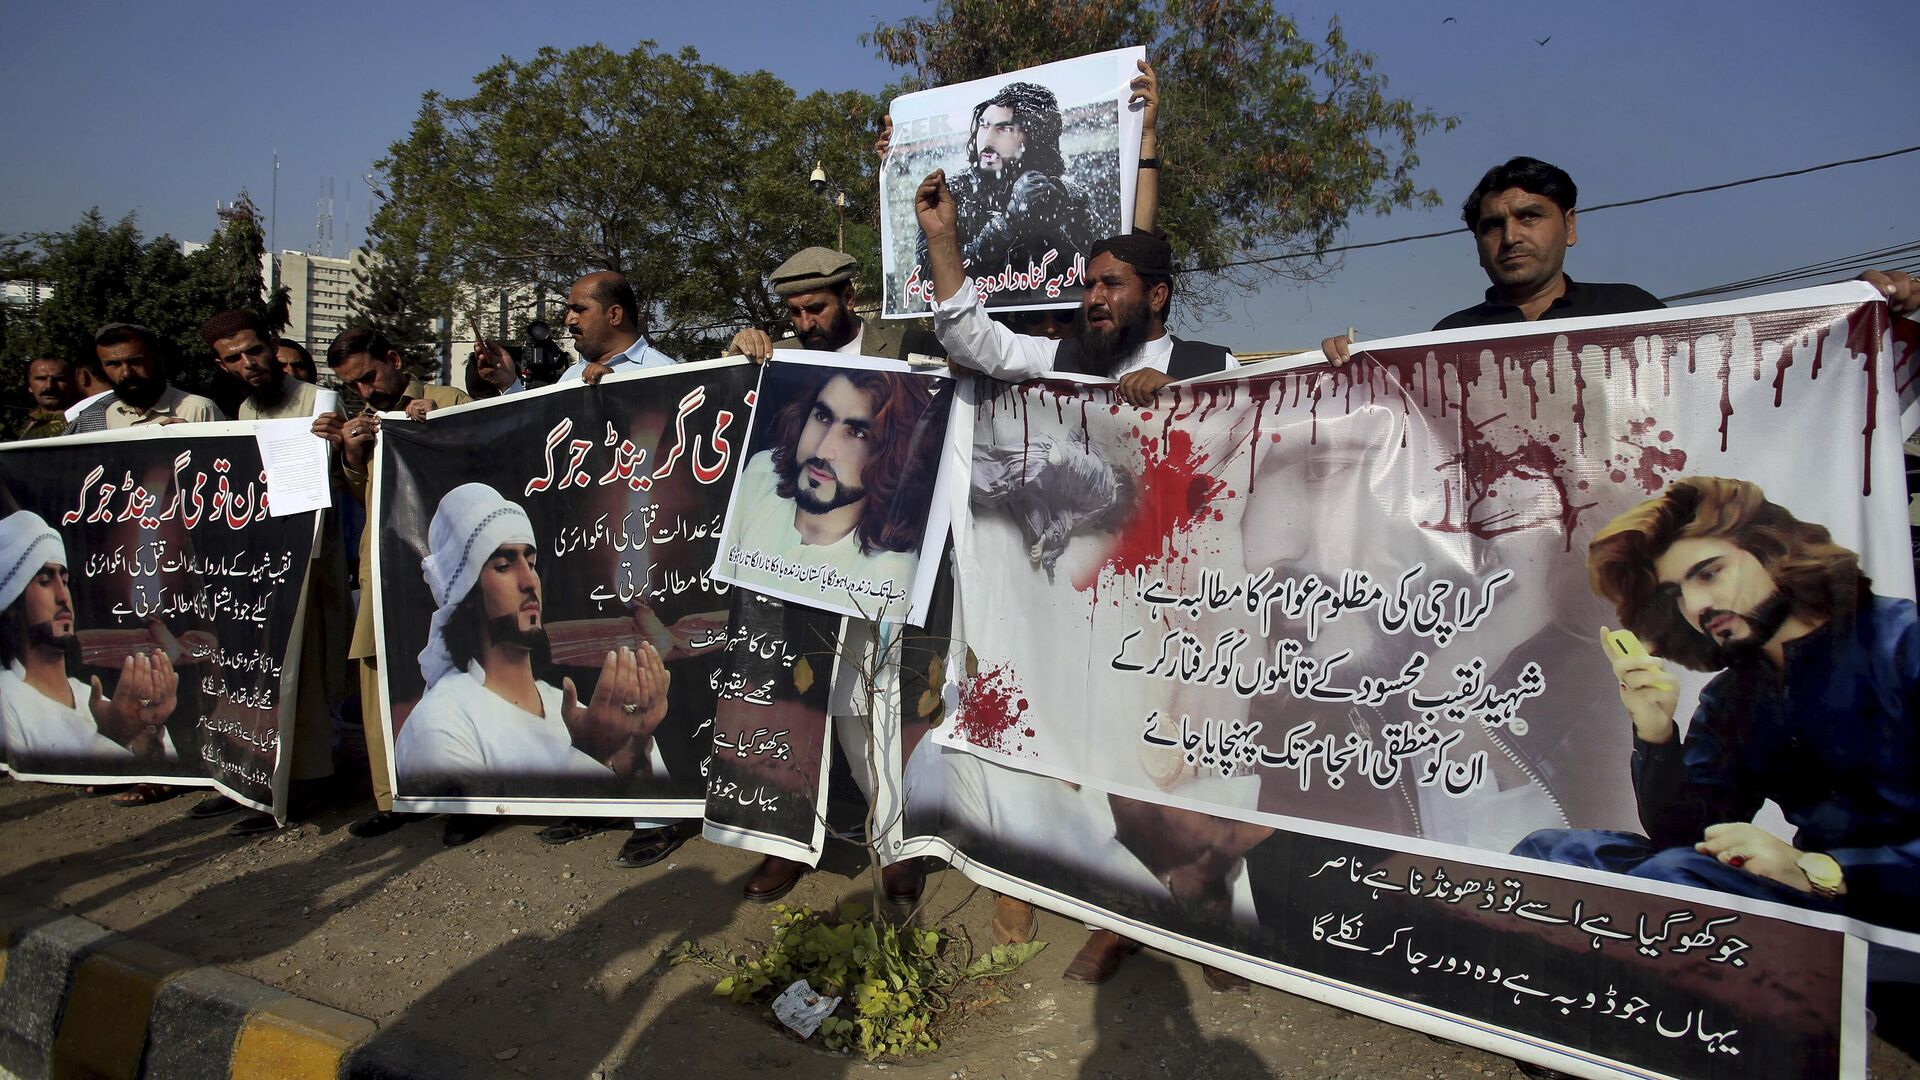 Relatives and friends of Naqeebullah Mehsud, who was killed in a police shoot-out, hold a banner that reads 'The People of Karachi Demand the Arrest of the Killers of Naqeebullah Mehsud and take the Logical End', outside a court in Karachi, Pakistan, Saturday, Jan. 27, 2018. - Sputnik India, 1920, 23.01.2023